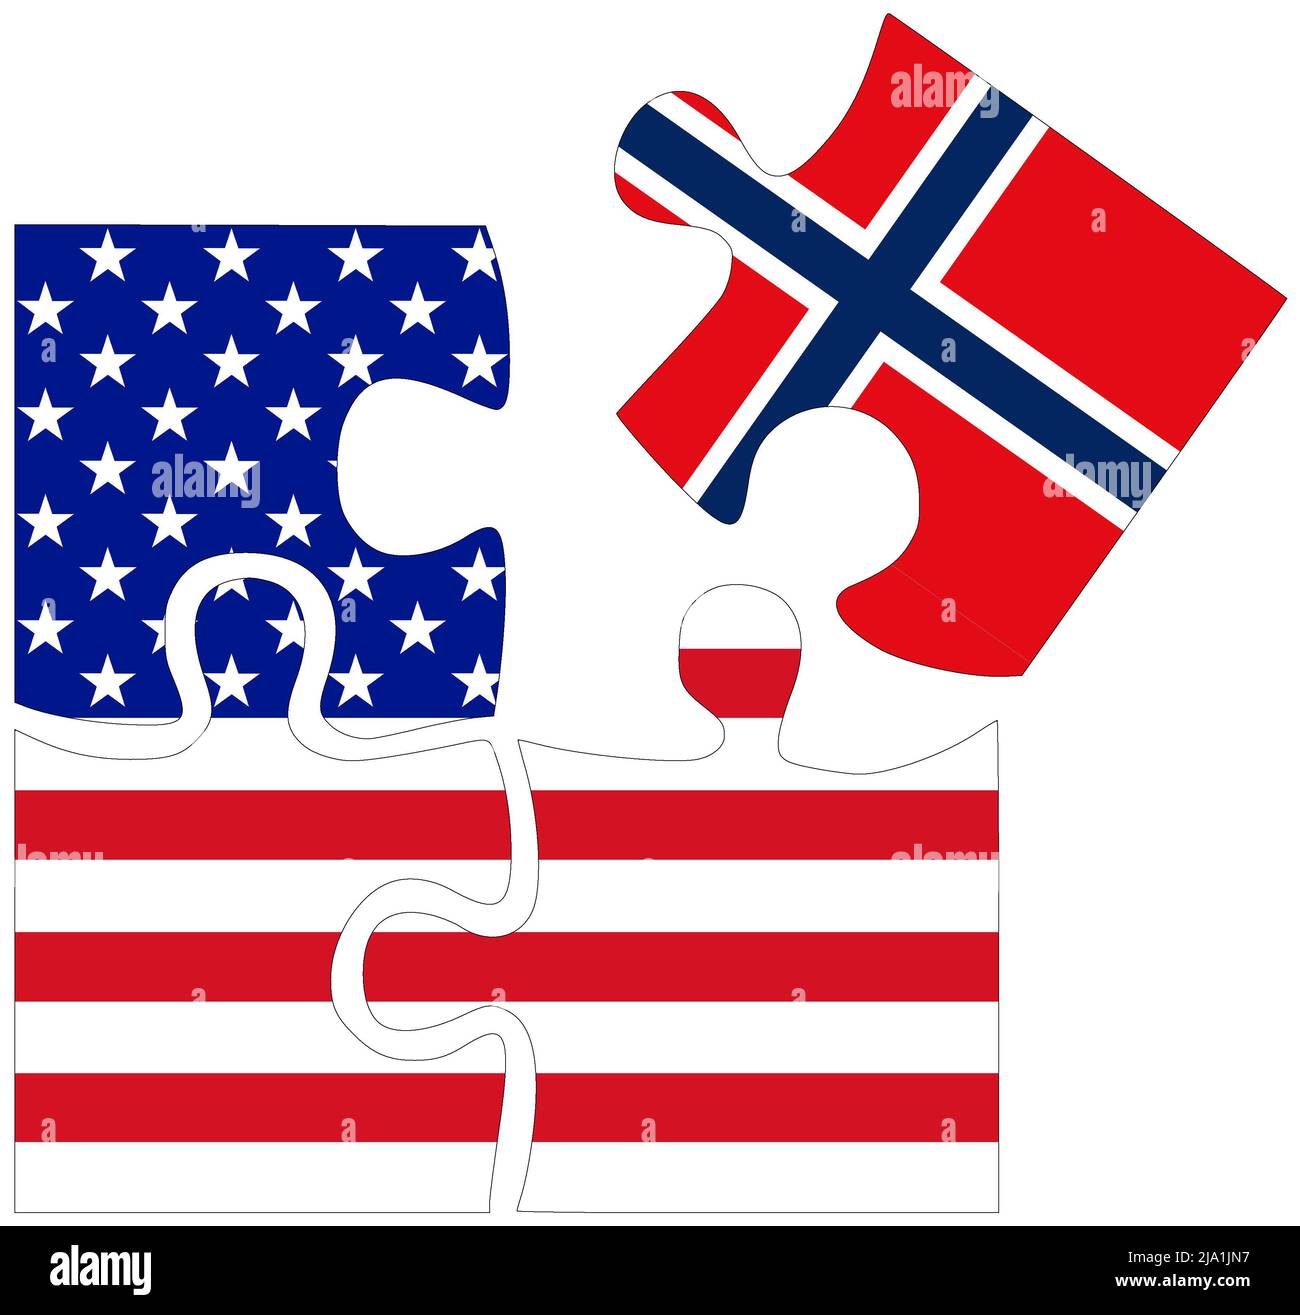 USA - Norway : puzzle shapes with flags, symbol of agreement or friendship Stock Photo